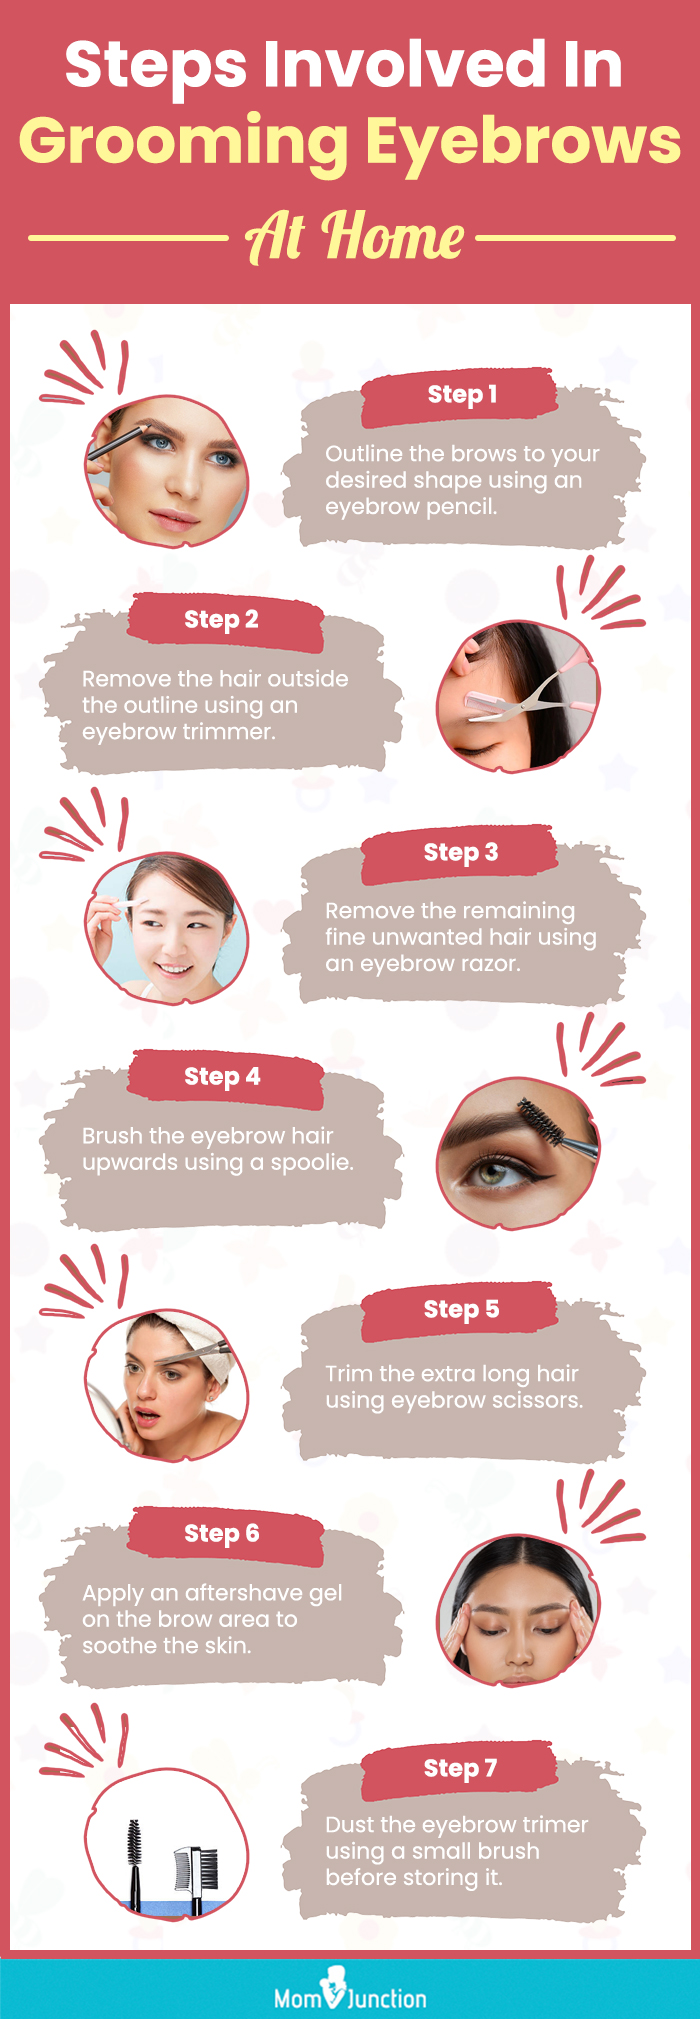 Steps Involved In Grooming Eyebrows At Home (infographic)